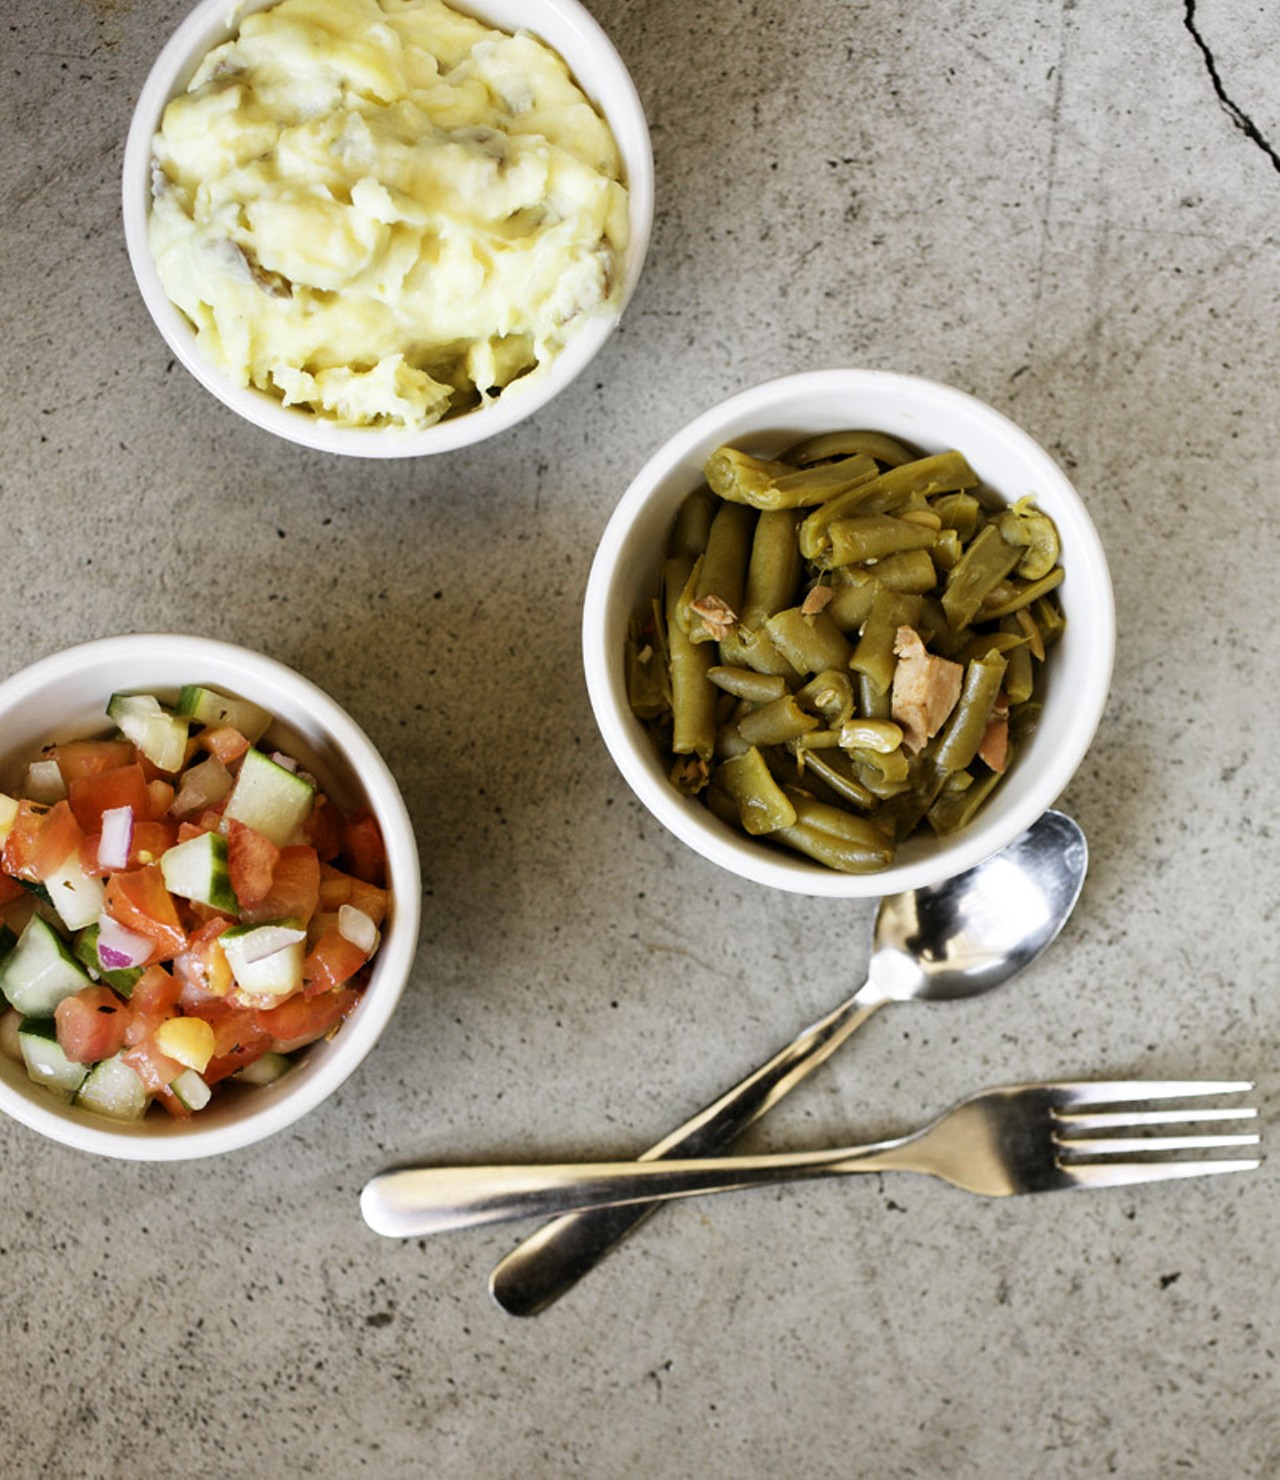 Three sides - potato salad, green beans with smoked turkey and cucumber and tomato salad.